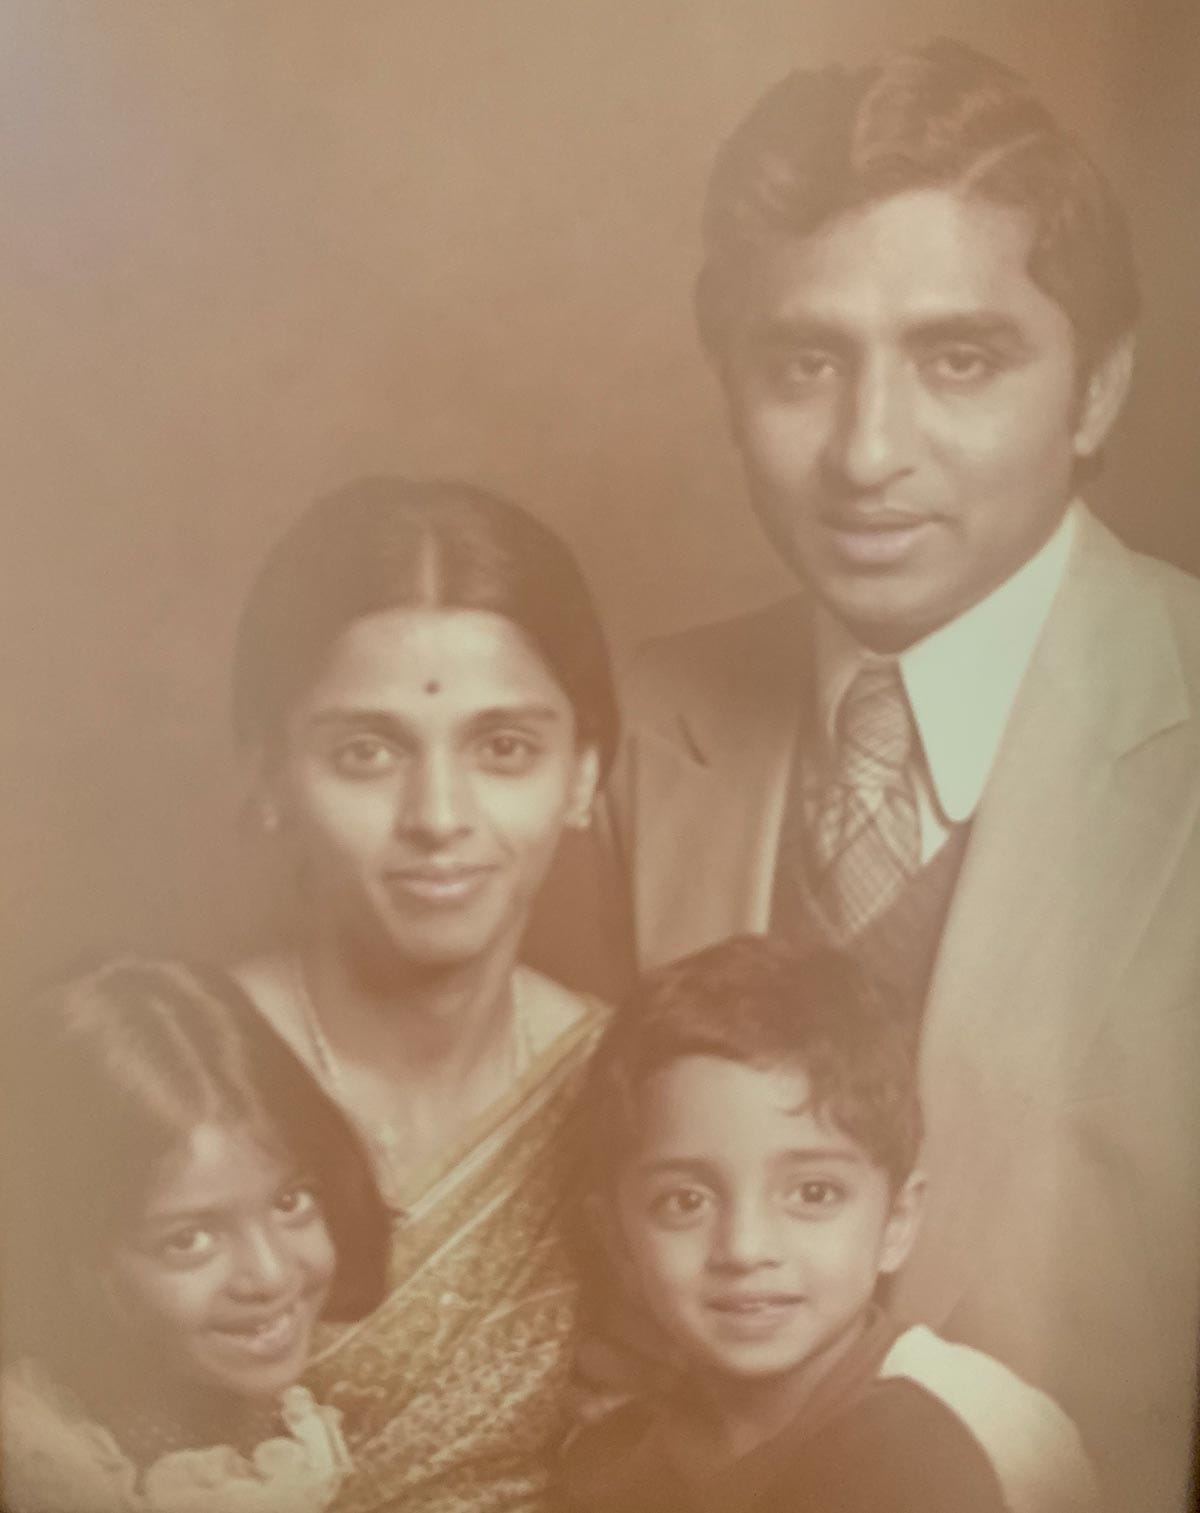 A sepia-tone photograph of Vivek Murthy as a child with his family.